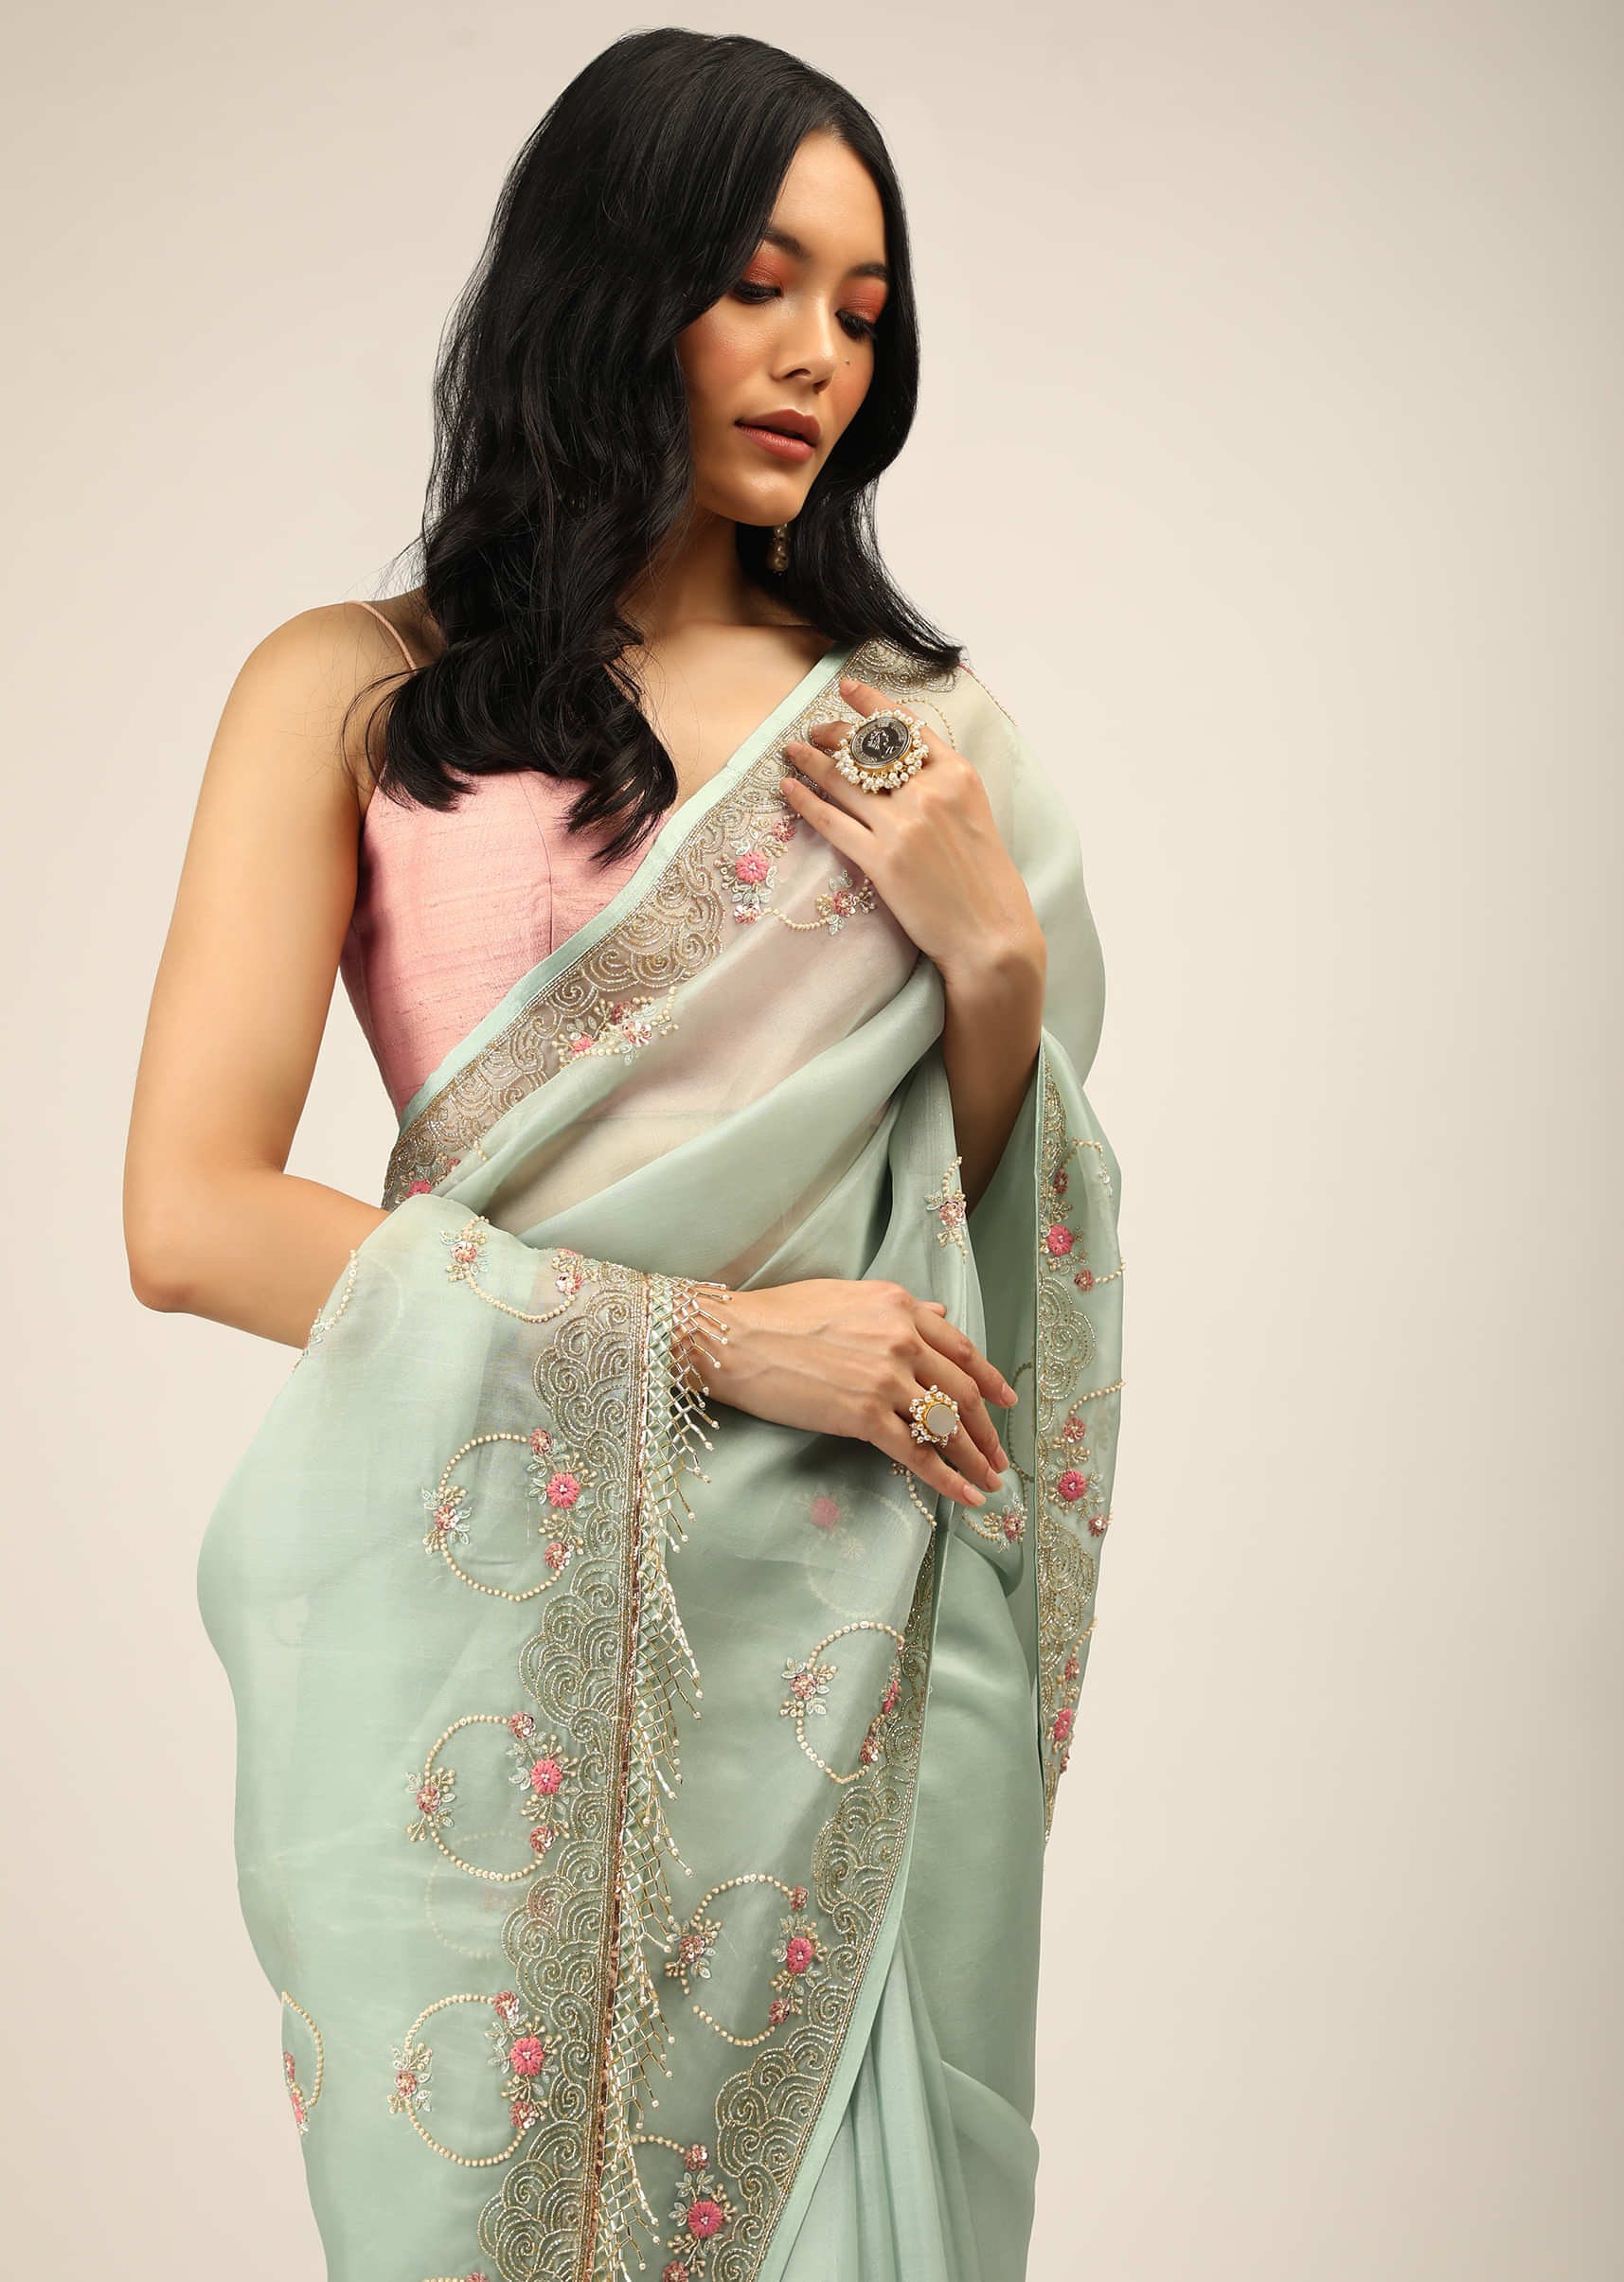 Pale Mint Saree In Organza With Multi Colored Resham And Cut Dana Embroidered Filigree And Floral Motifs On The Border And Buttis  